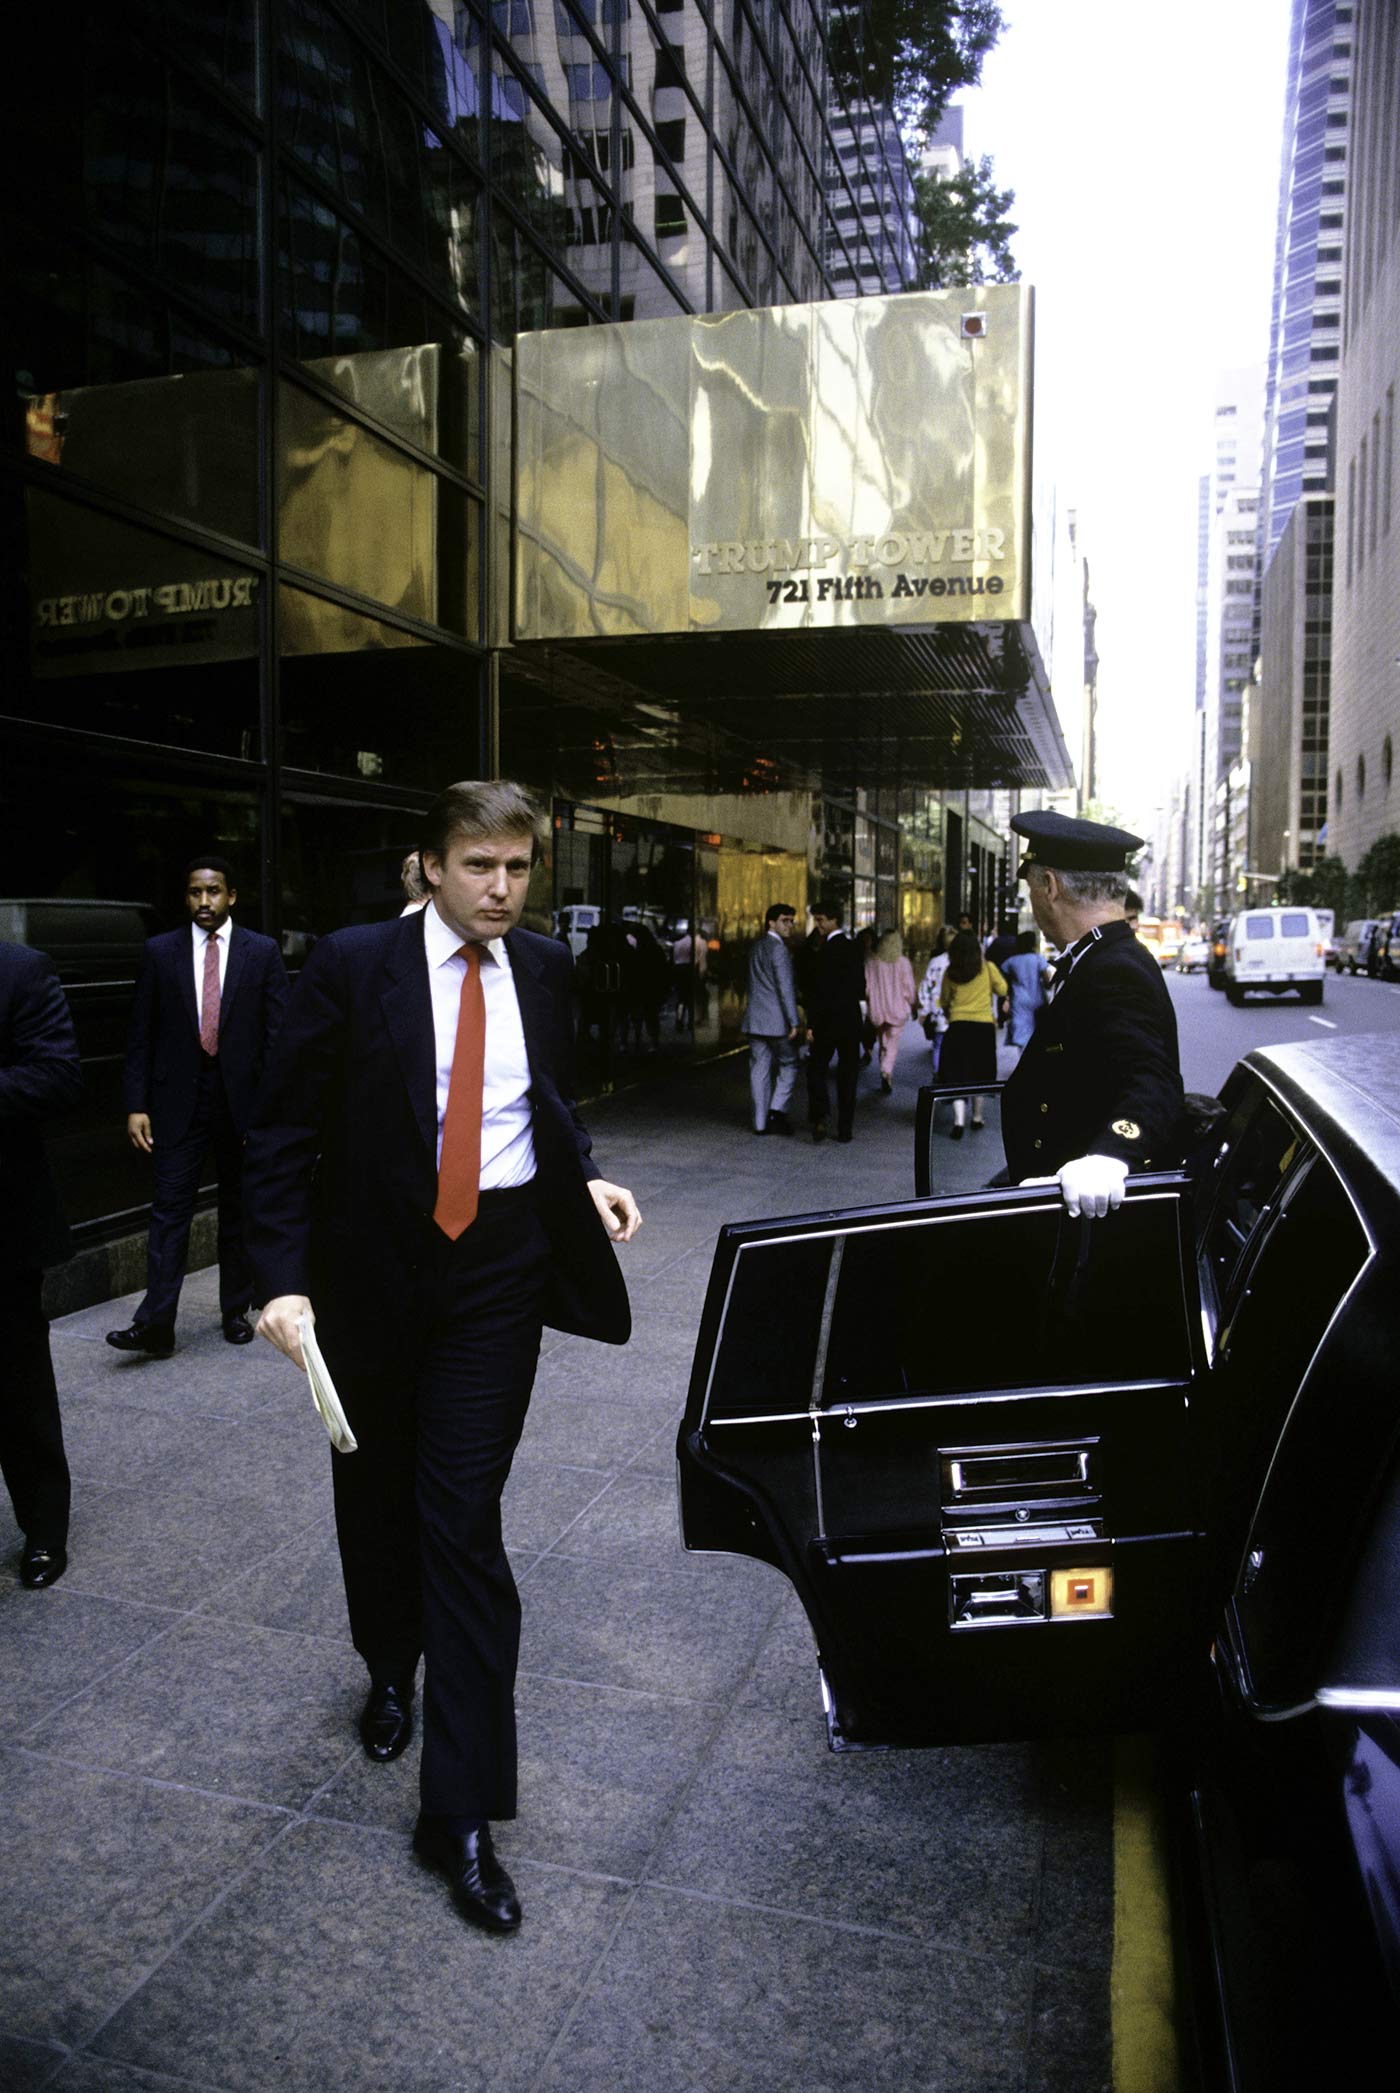 Donald Trump steps into his limousine outside Trump Tower in August 1987